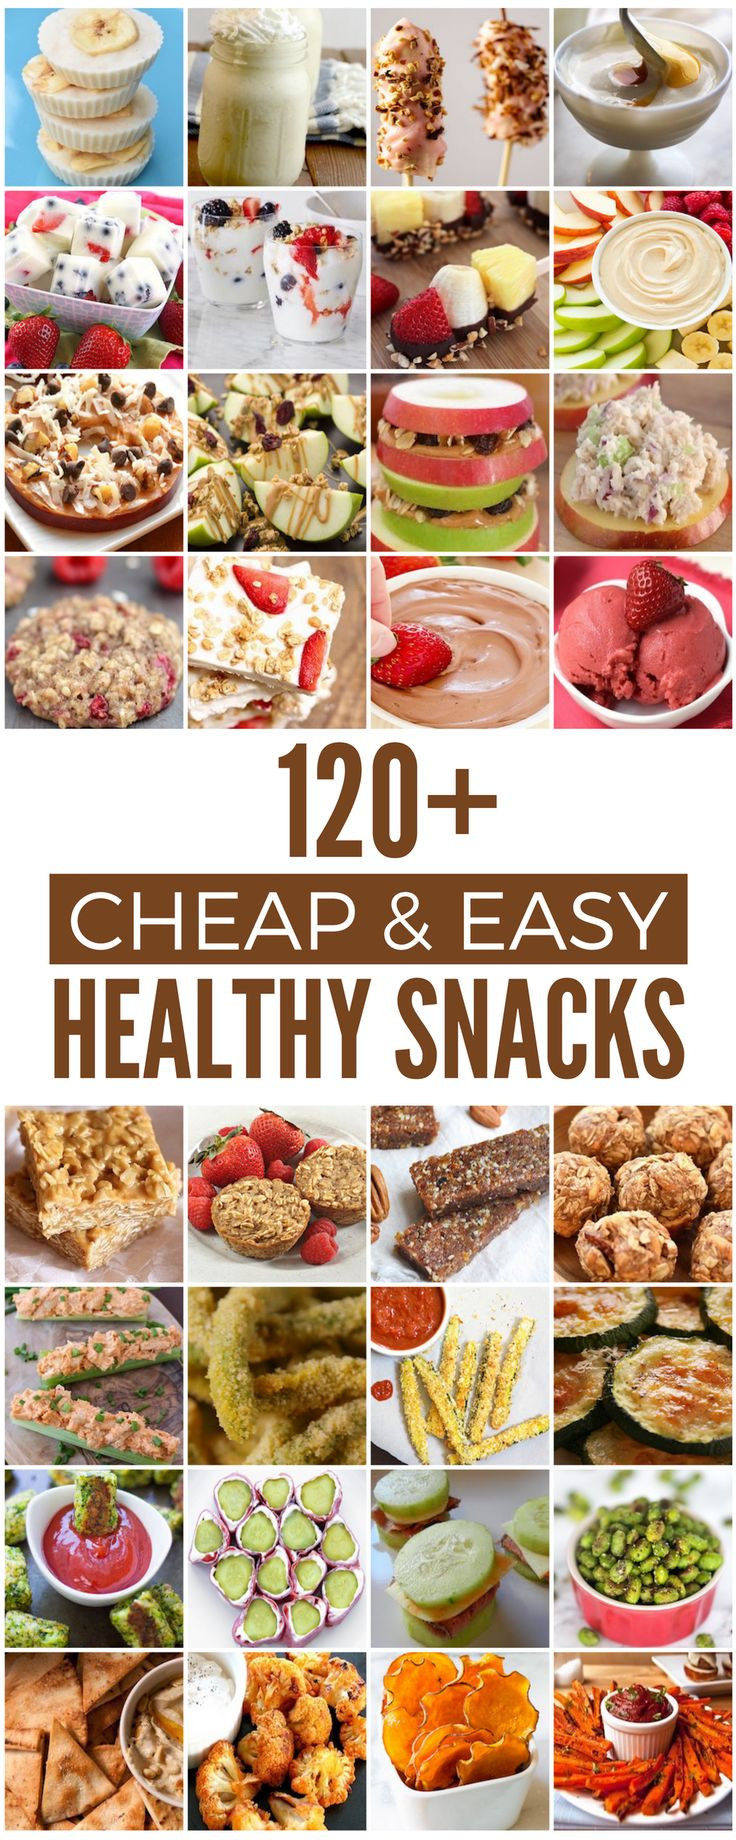 Healthy Affordable Snacks
 The 25 best Healthy snacks ideas on Pinterest